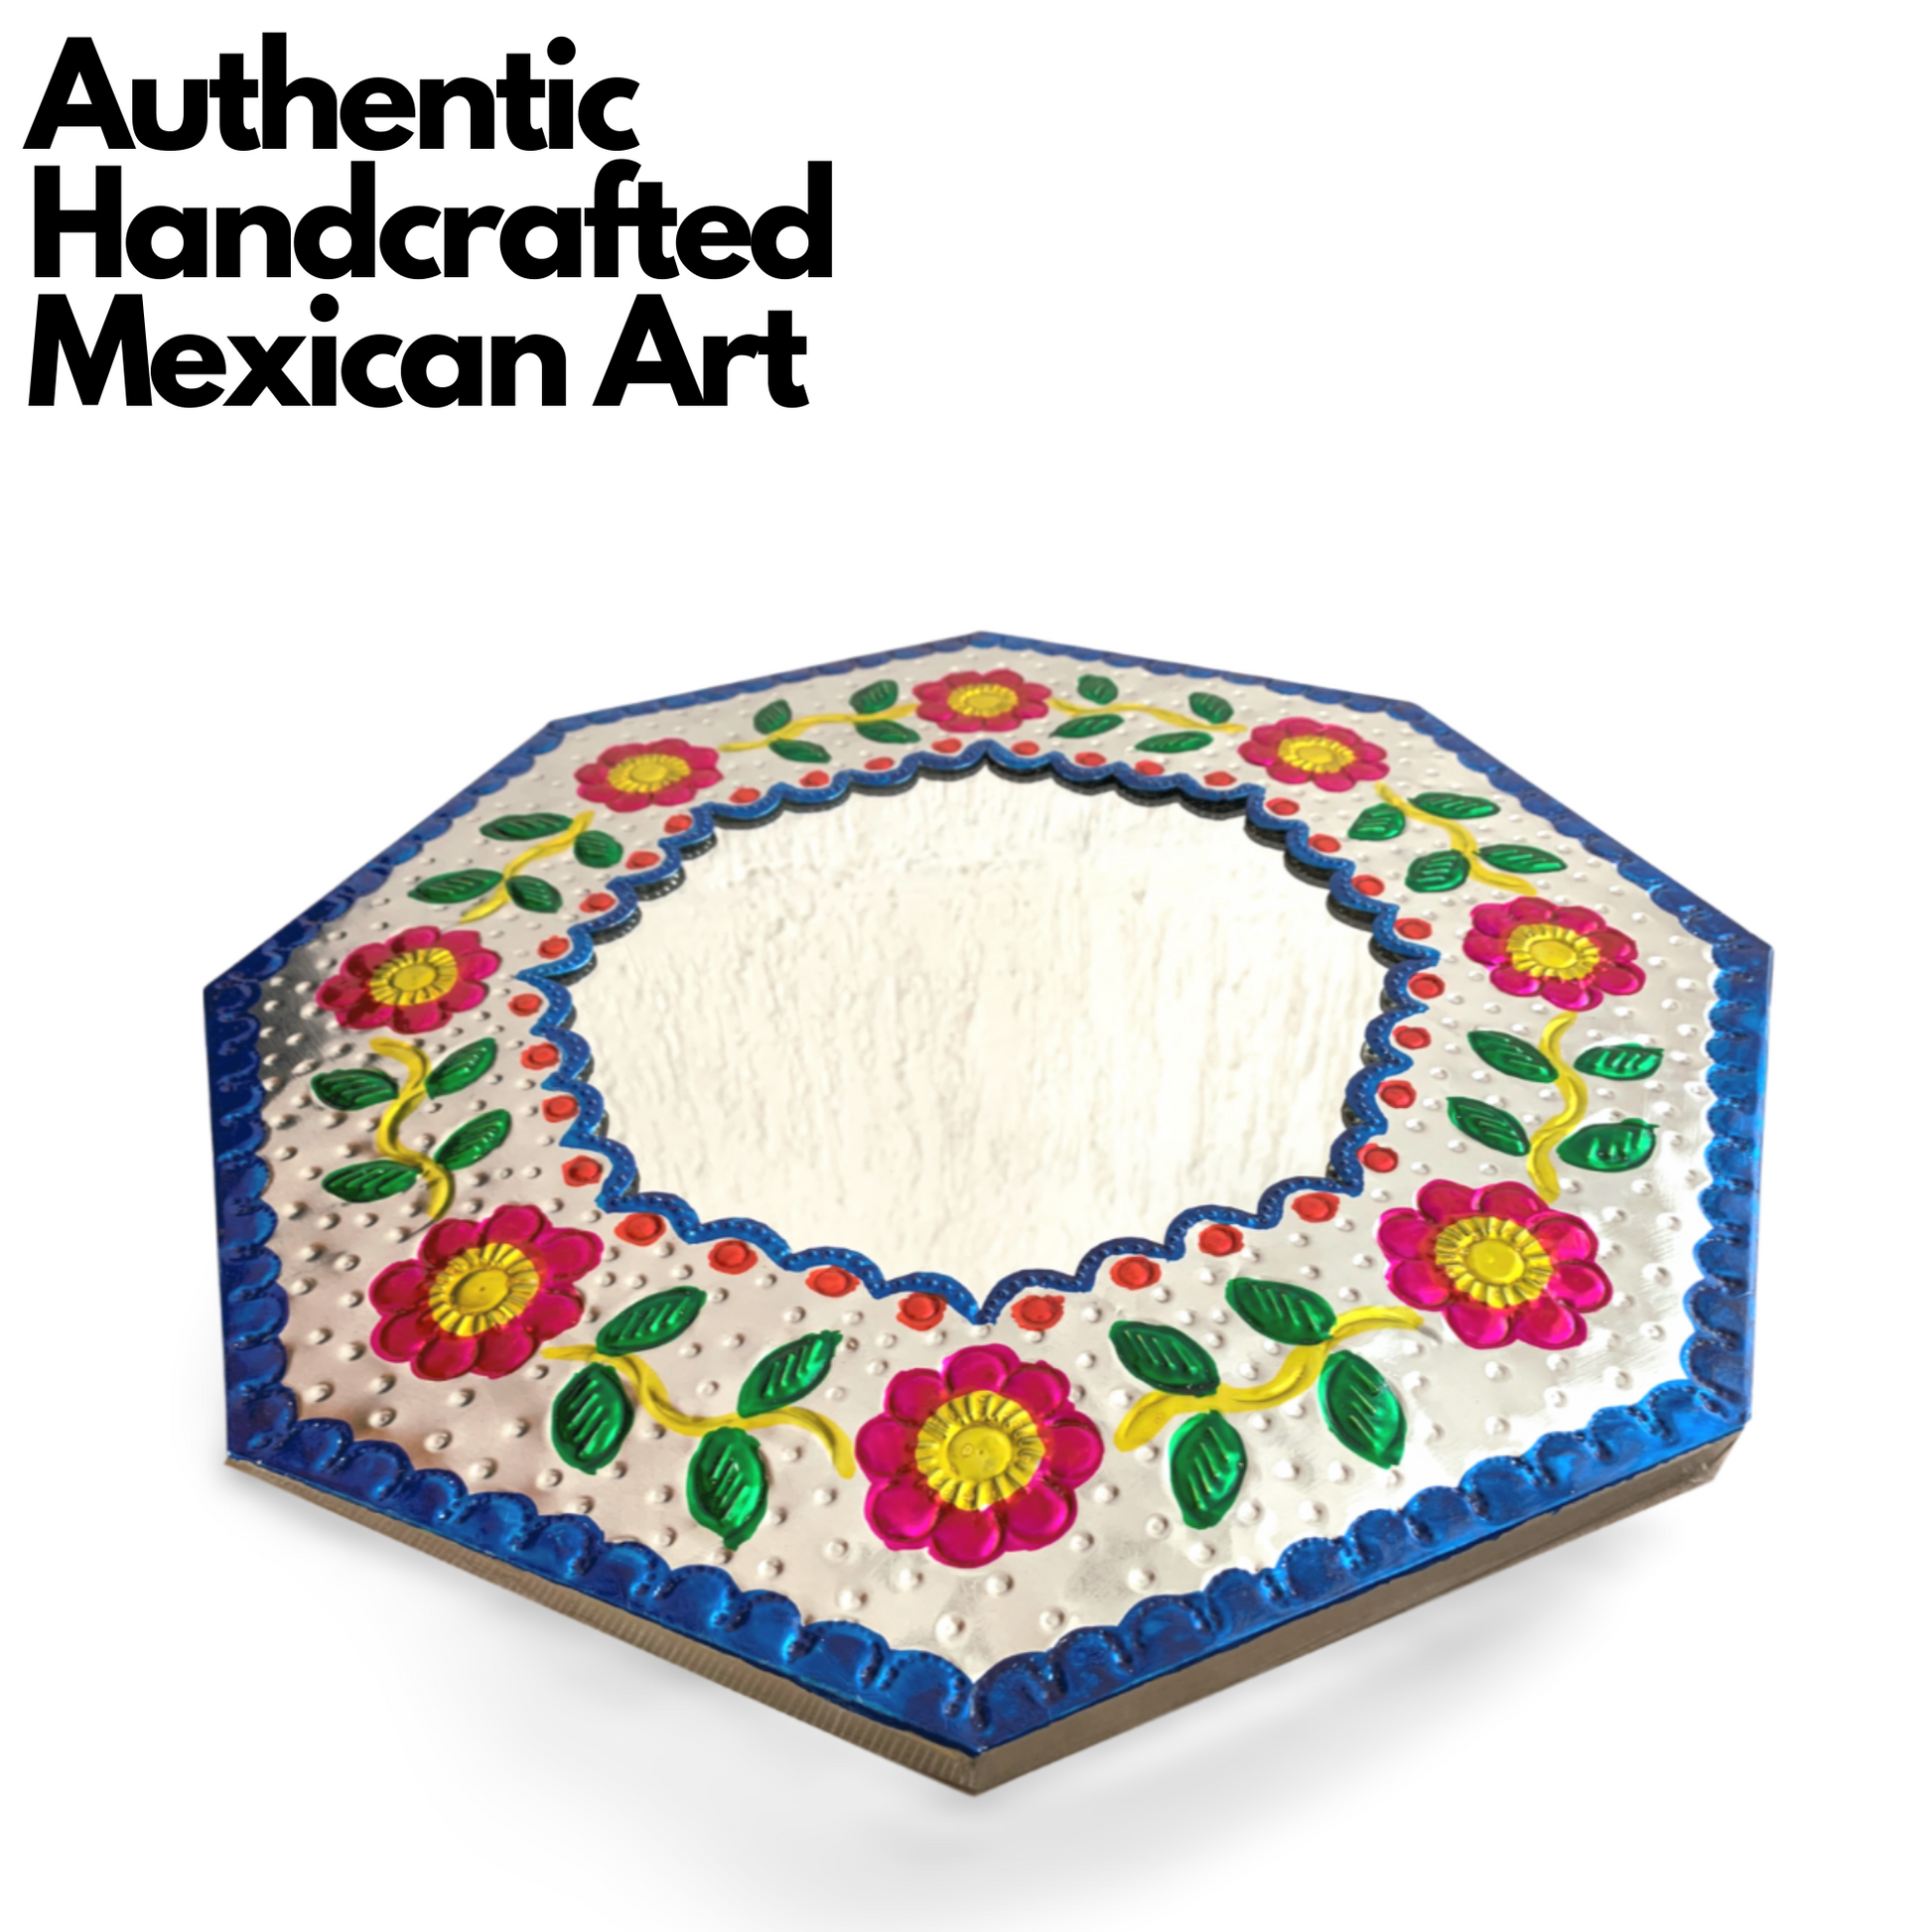 authentic handcrafted mexican art Casa Fiesta Designs' Embossed Tin Mirror - Handcrafted and Hand-painted Mexican Folk Art Wall Decor.